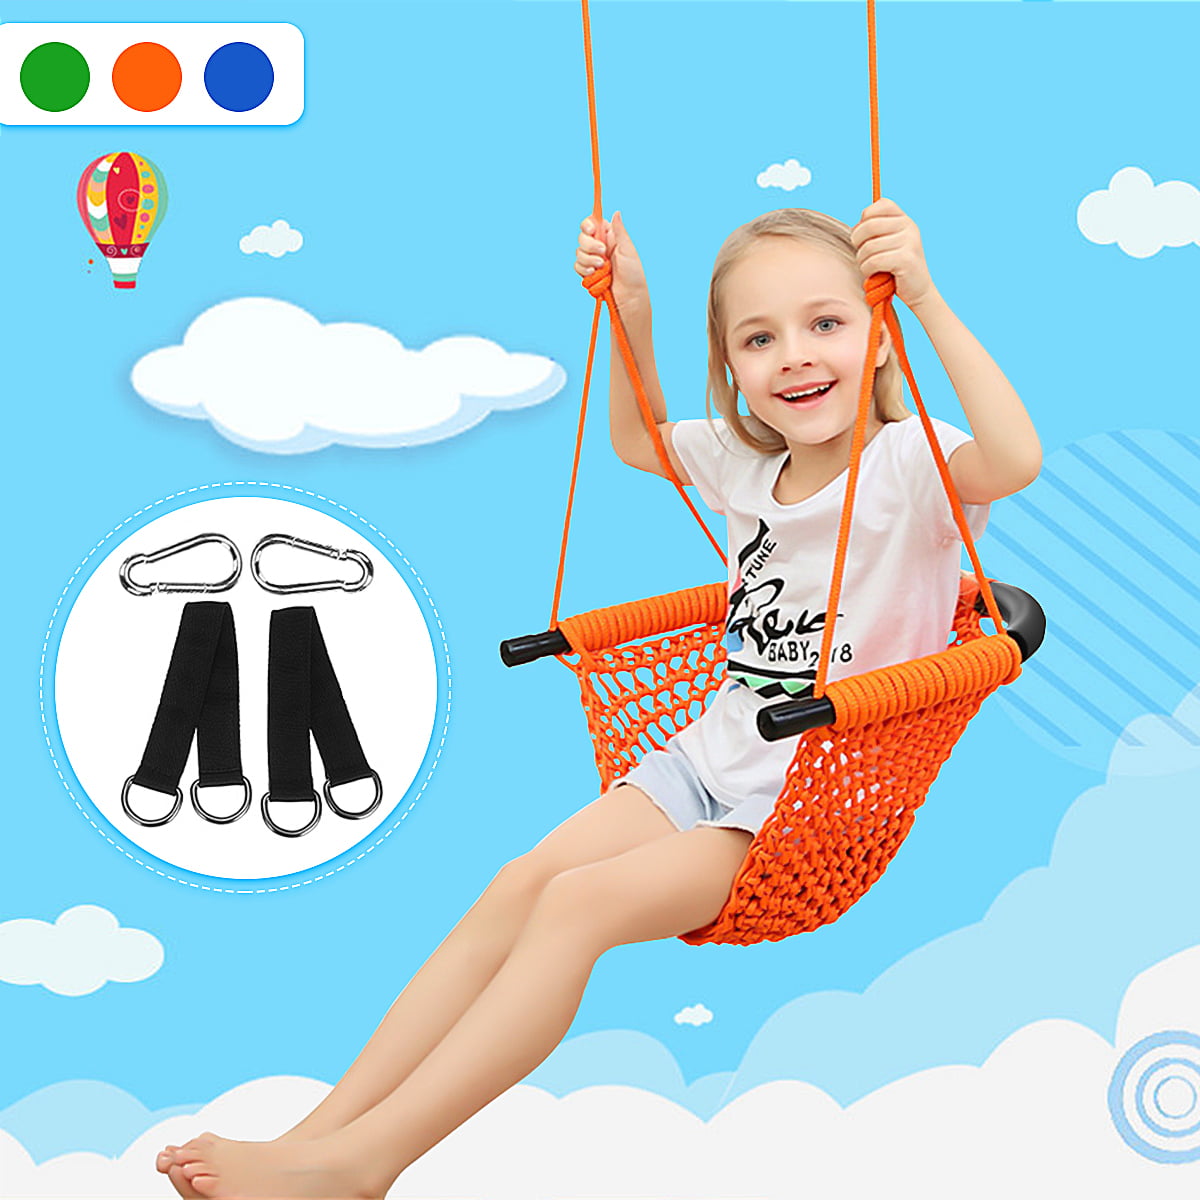 Orange Nest Swing Set Round Netted Seat Toy Outdoor Indoor Swings Up to 150 kg Adjustable Web Rope Hanging Tree Backyard Garden for Children 3 4 5 6 7 8 9 Year Old Boys Girls Kids Oxford